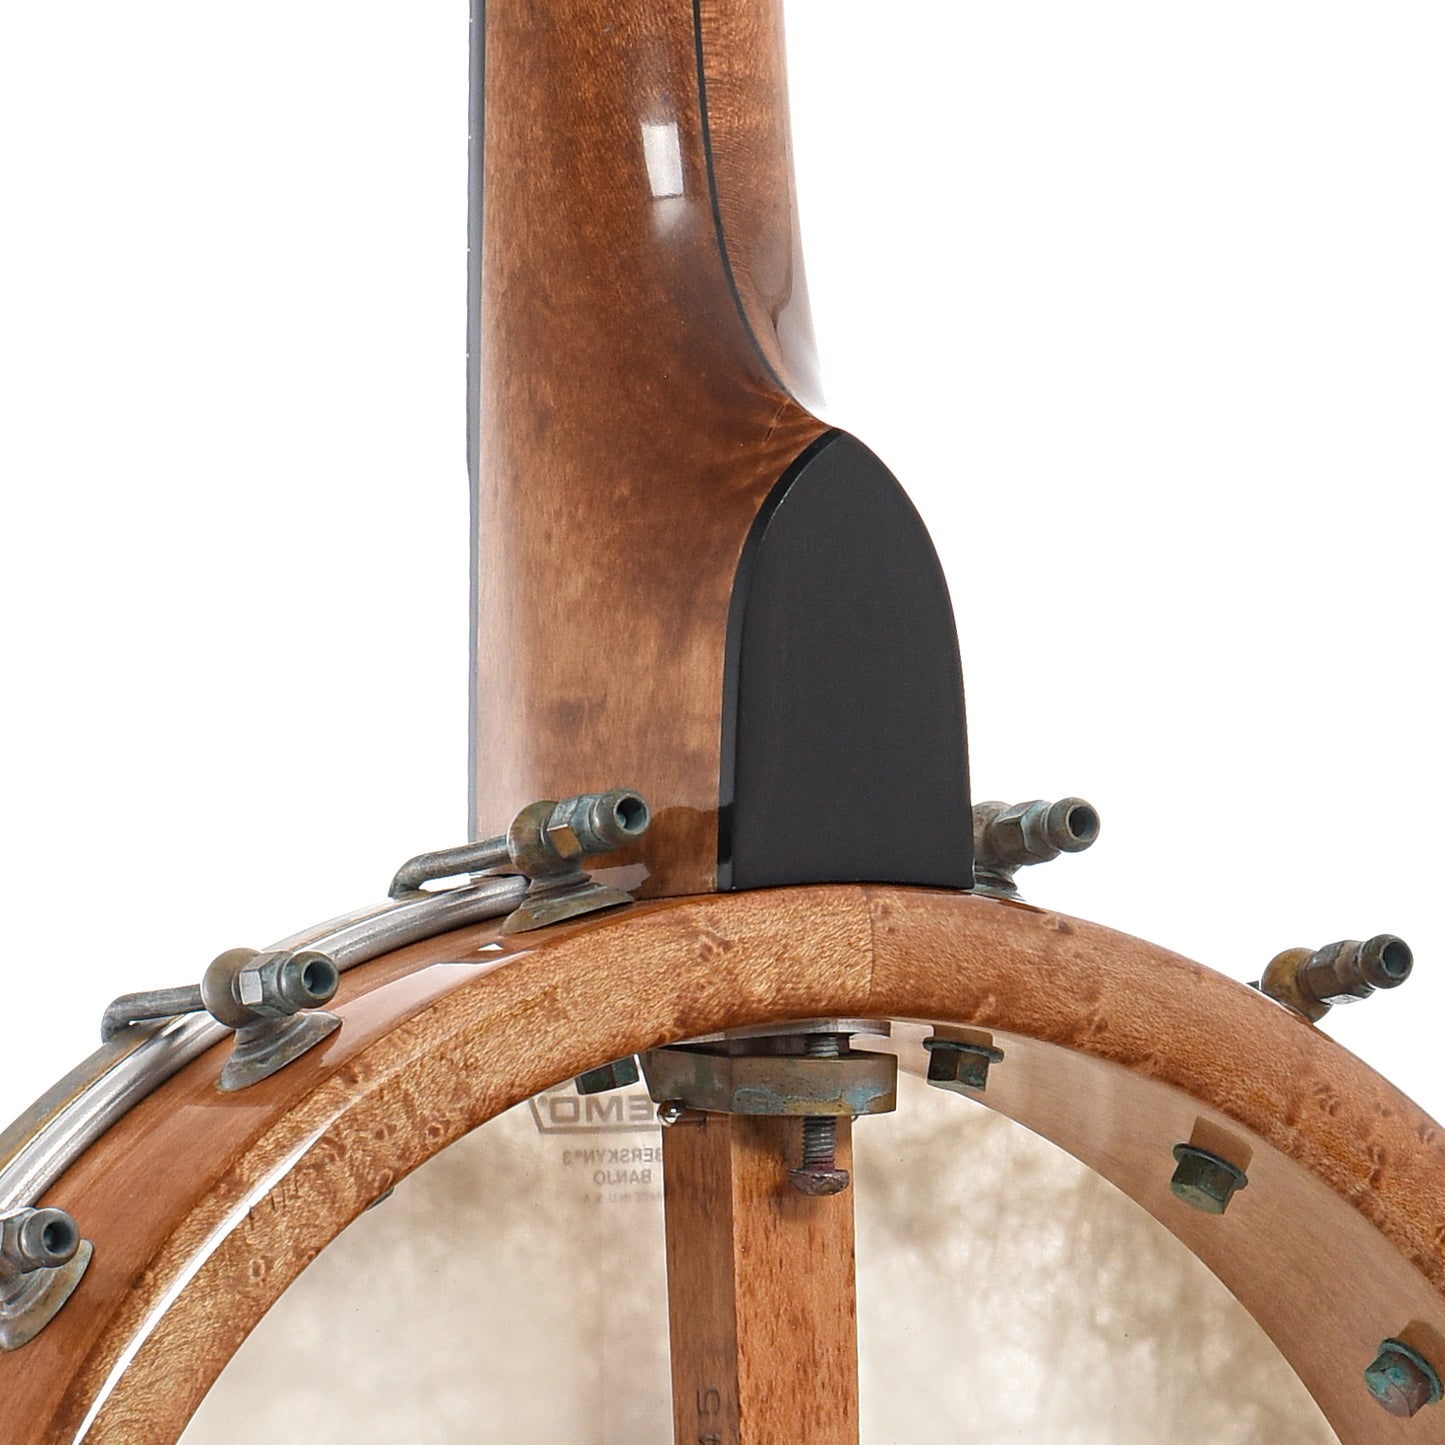 Neck joint of Bloom Old Brass Special Openback Banjo